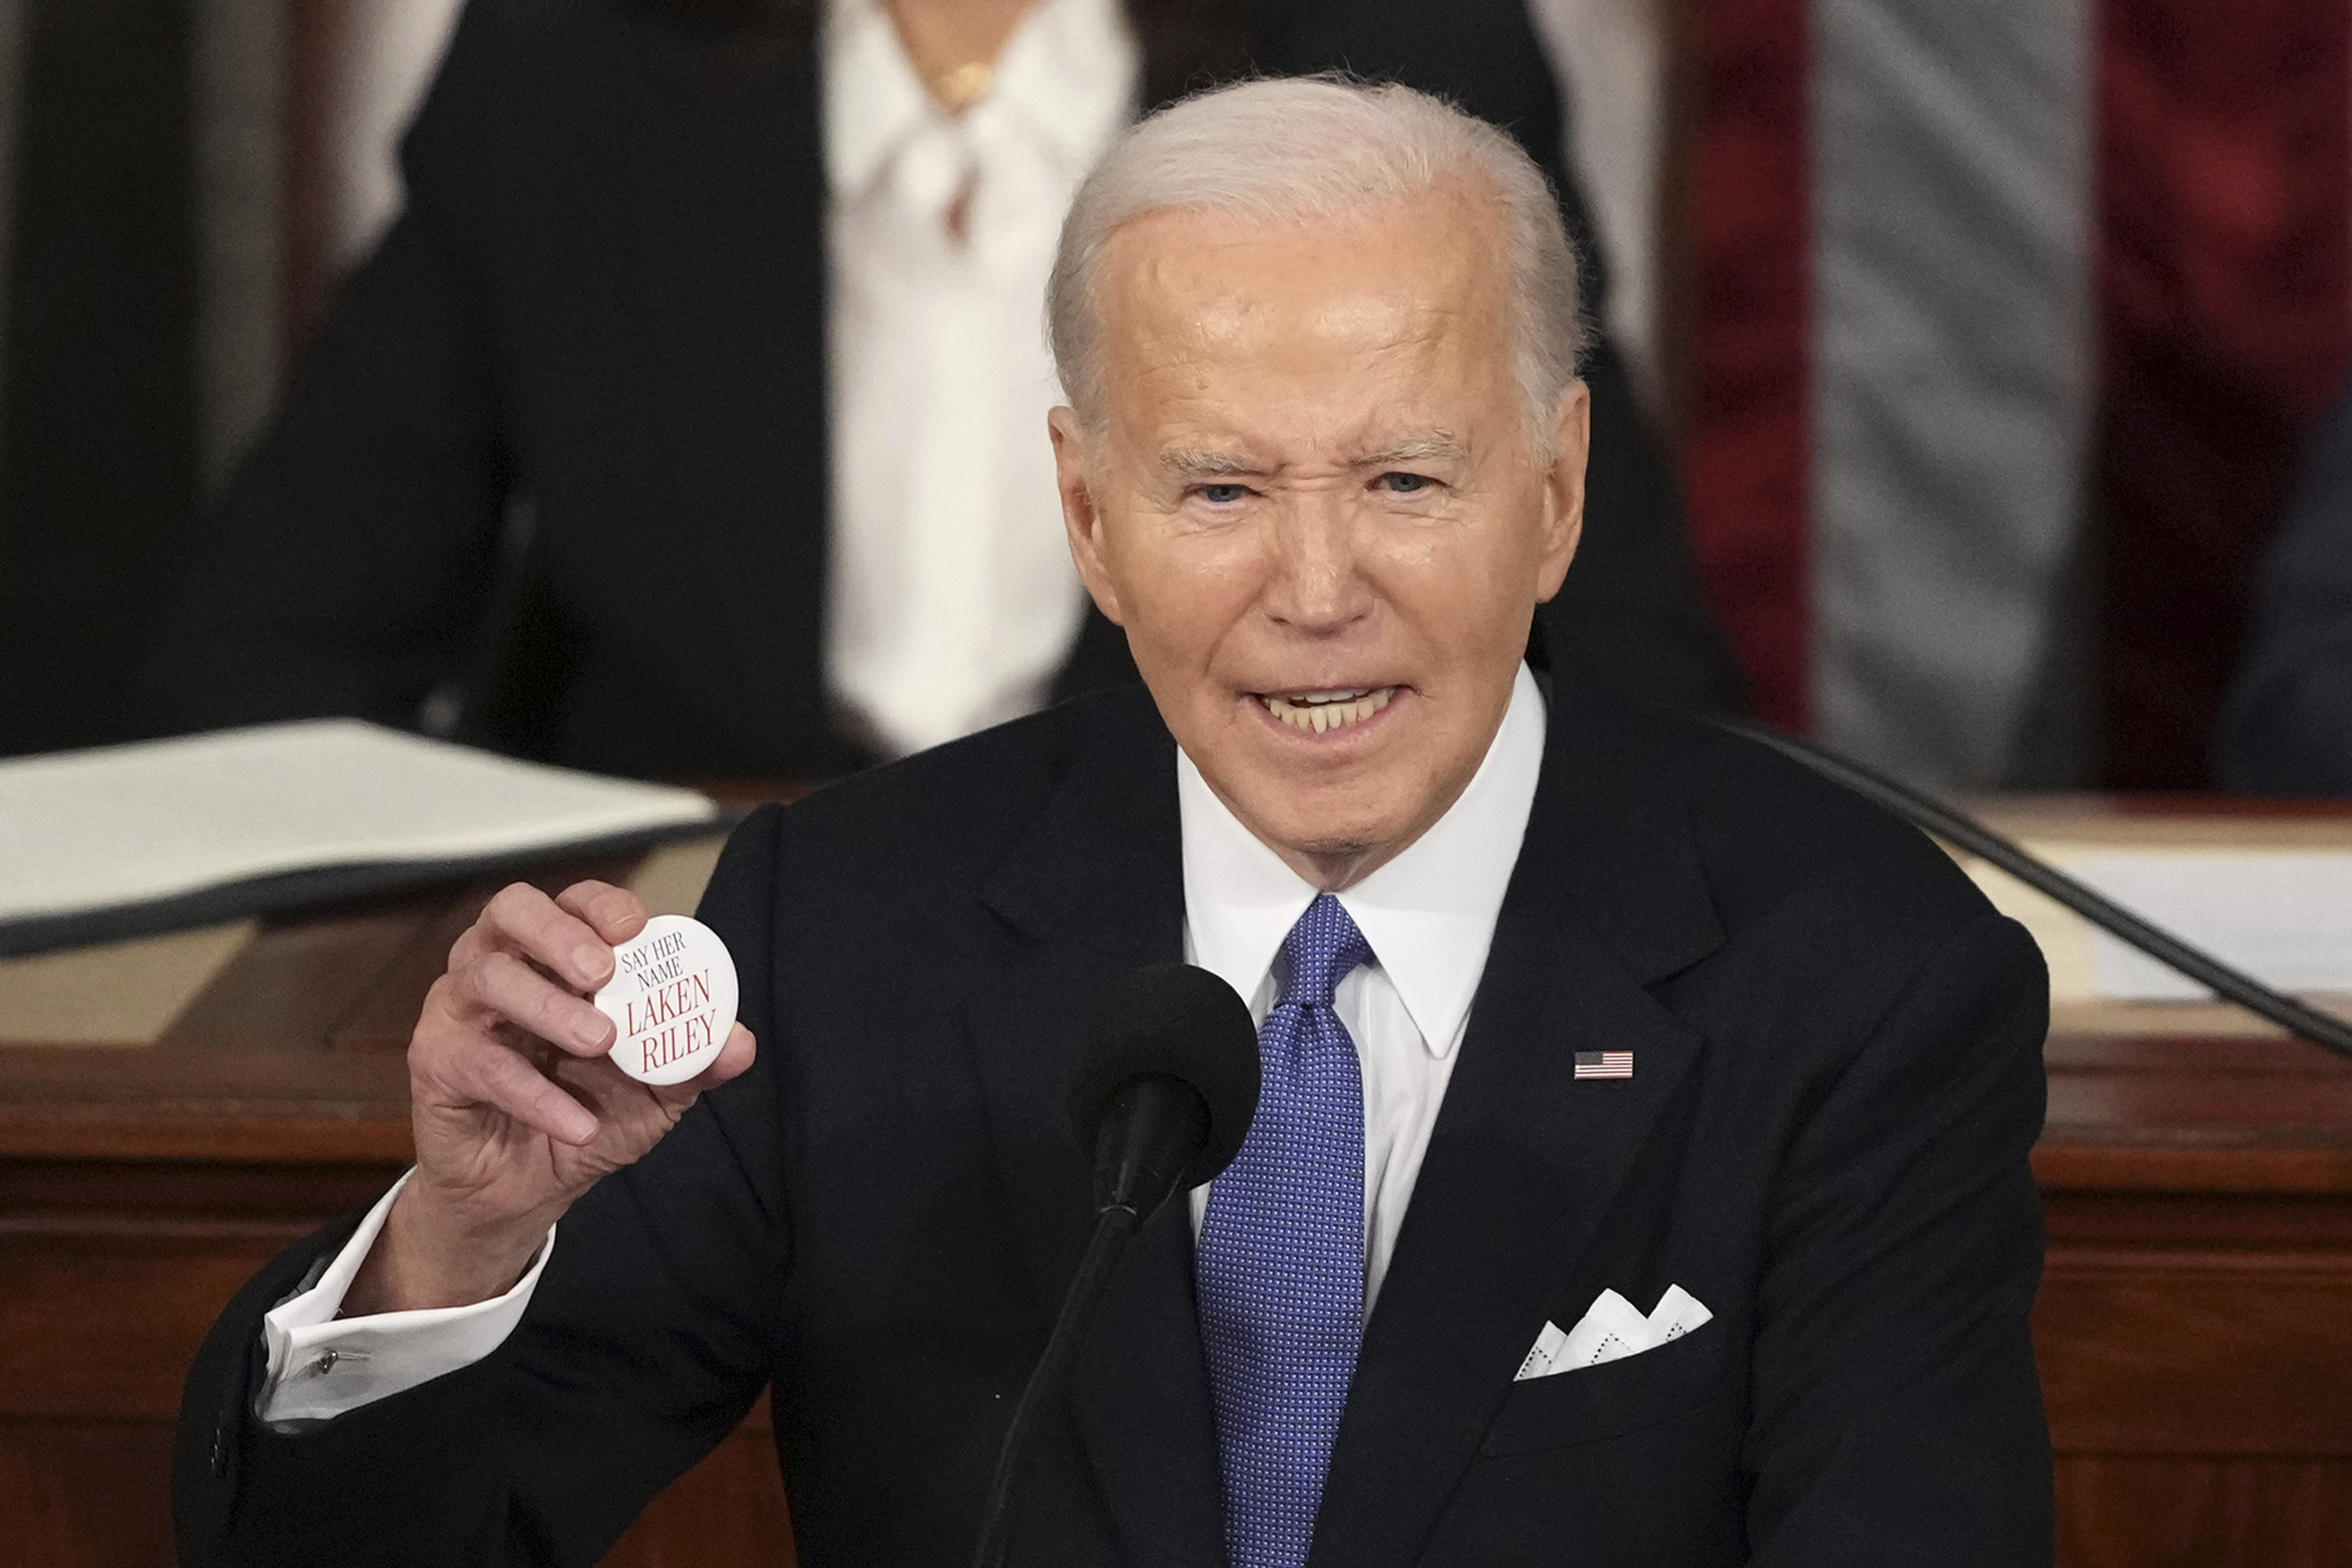 President Joe Biden holds up a button with Laken Riley's name as he delivers his State of the Union address at the Capitol in Washington, DC, on March 7.